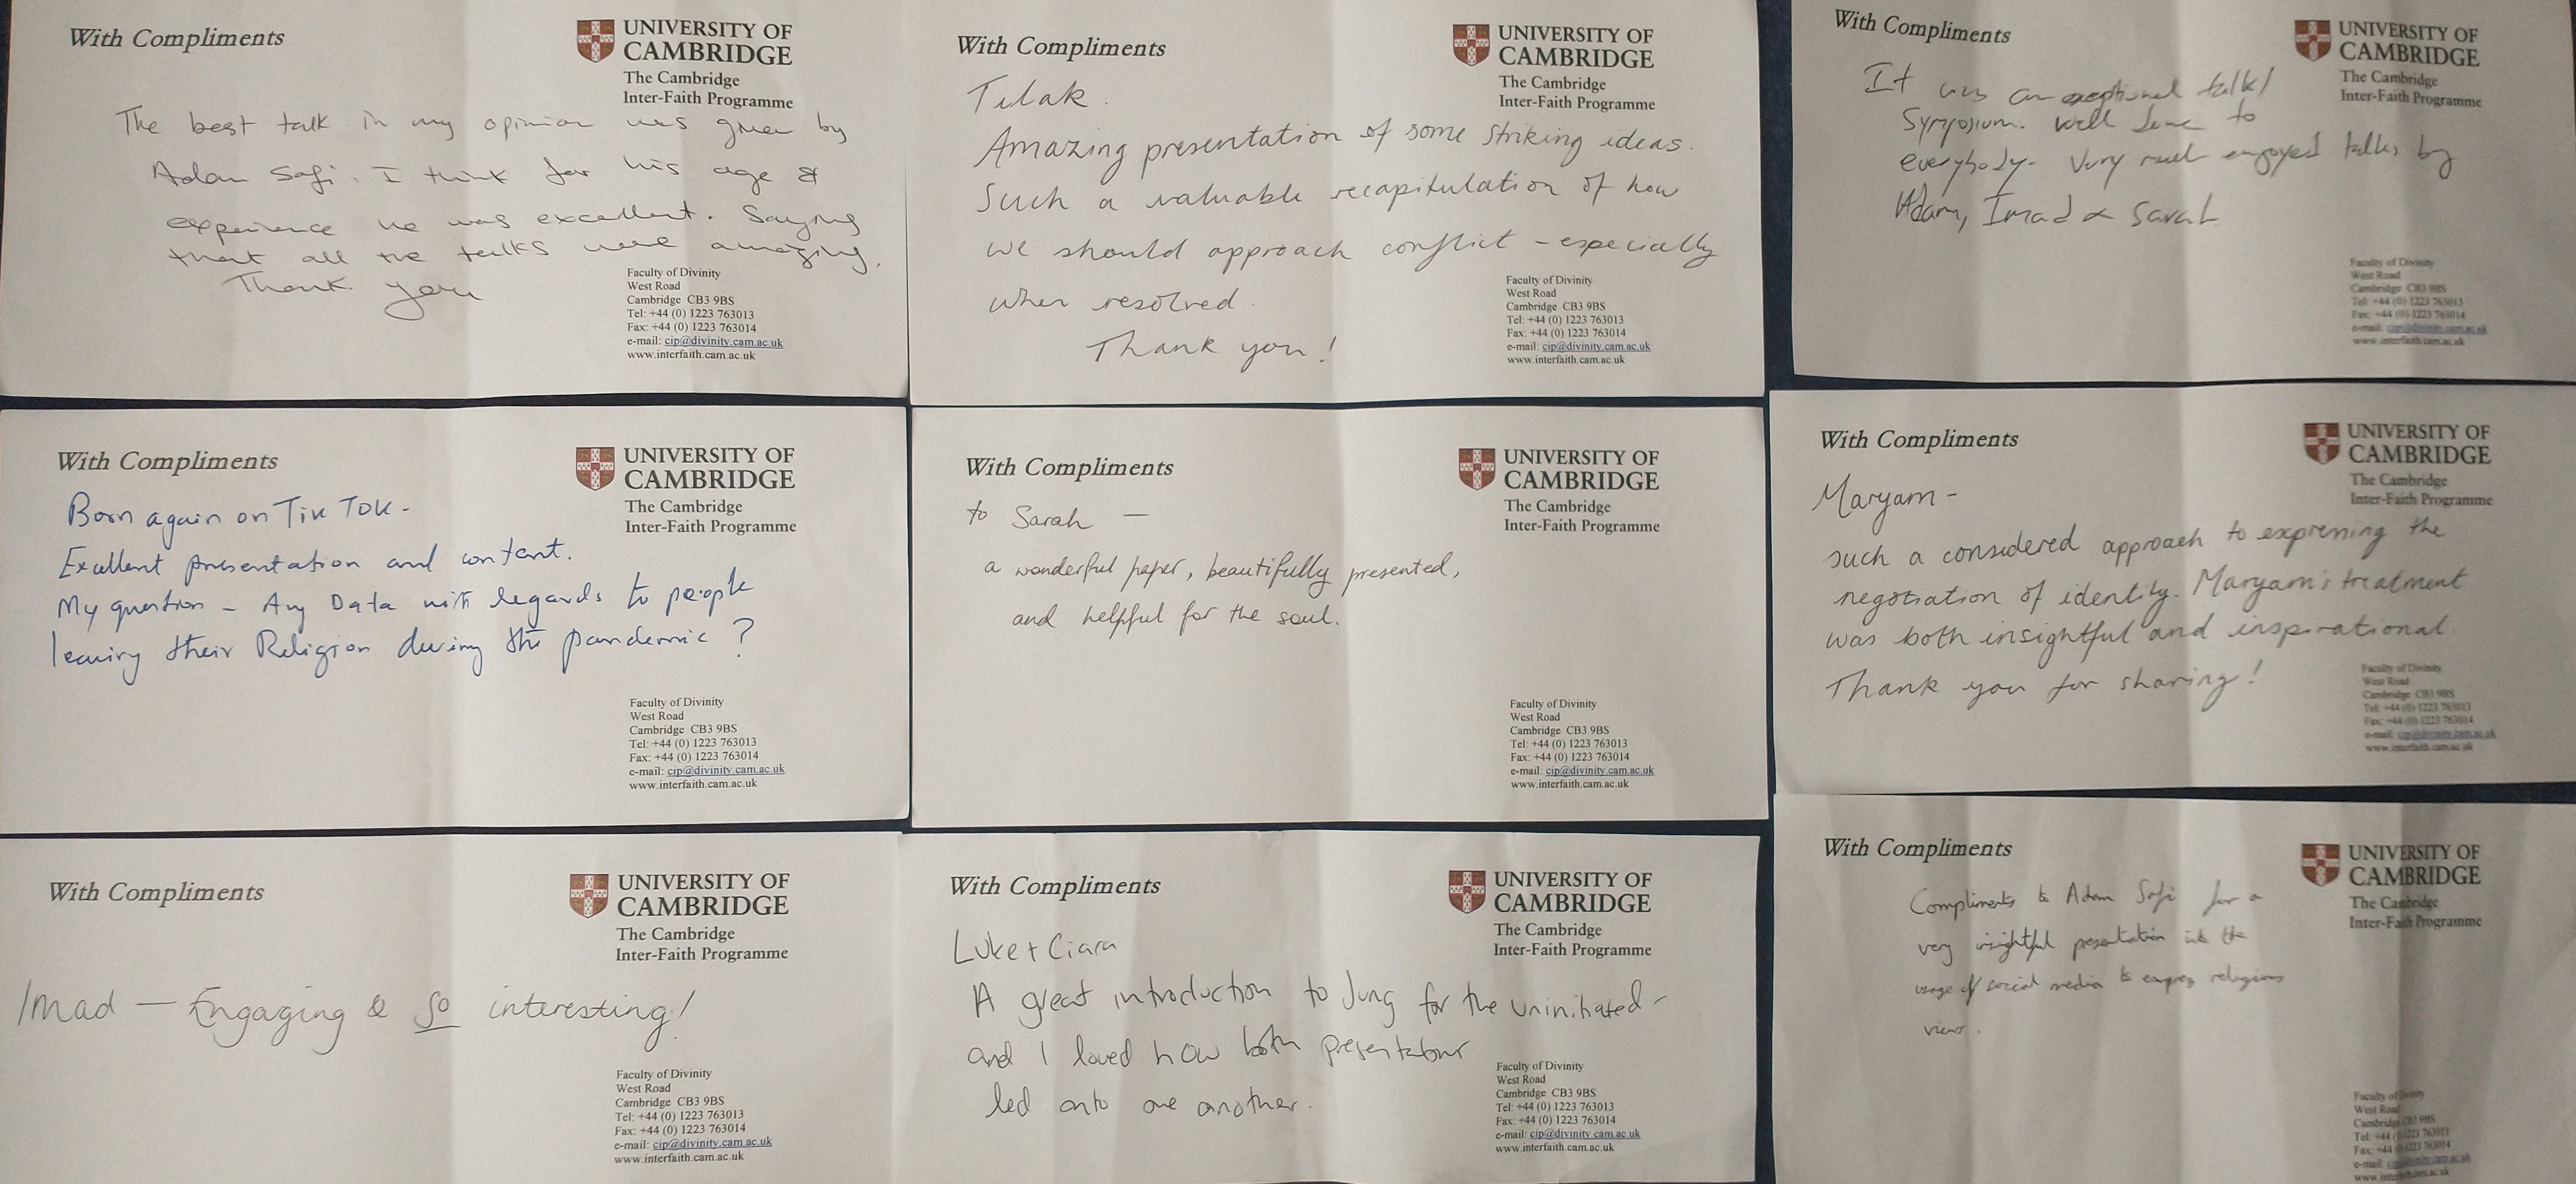 9 CIP compliment slips with handwritten messages including "all the talks were amazing", "striking ideas, a valuable recapitulation", "exceptional", "excellent", "wonderful, beautifully presented", "considered, insightful and inspirational"